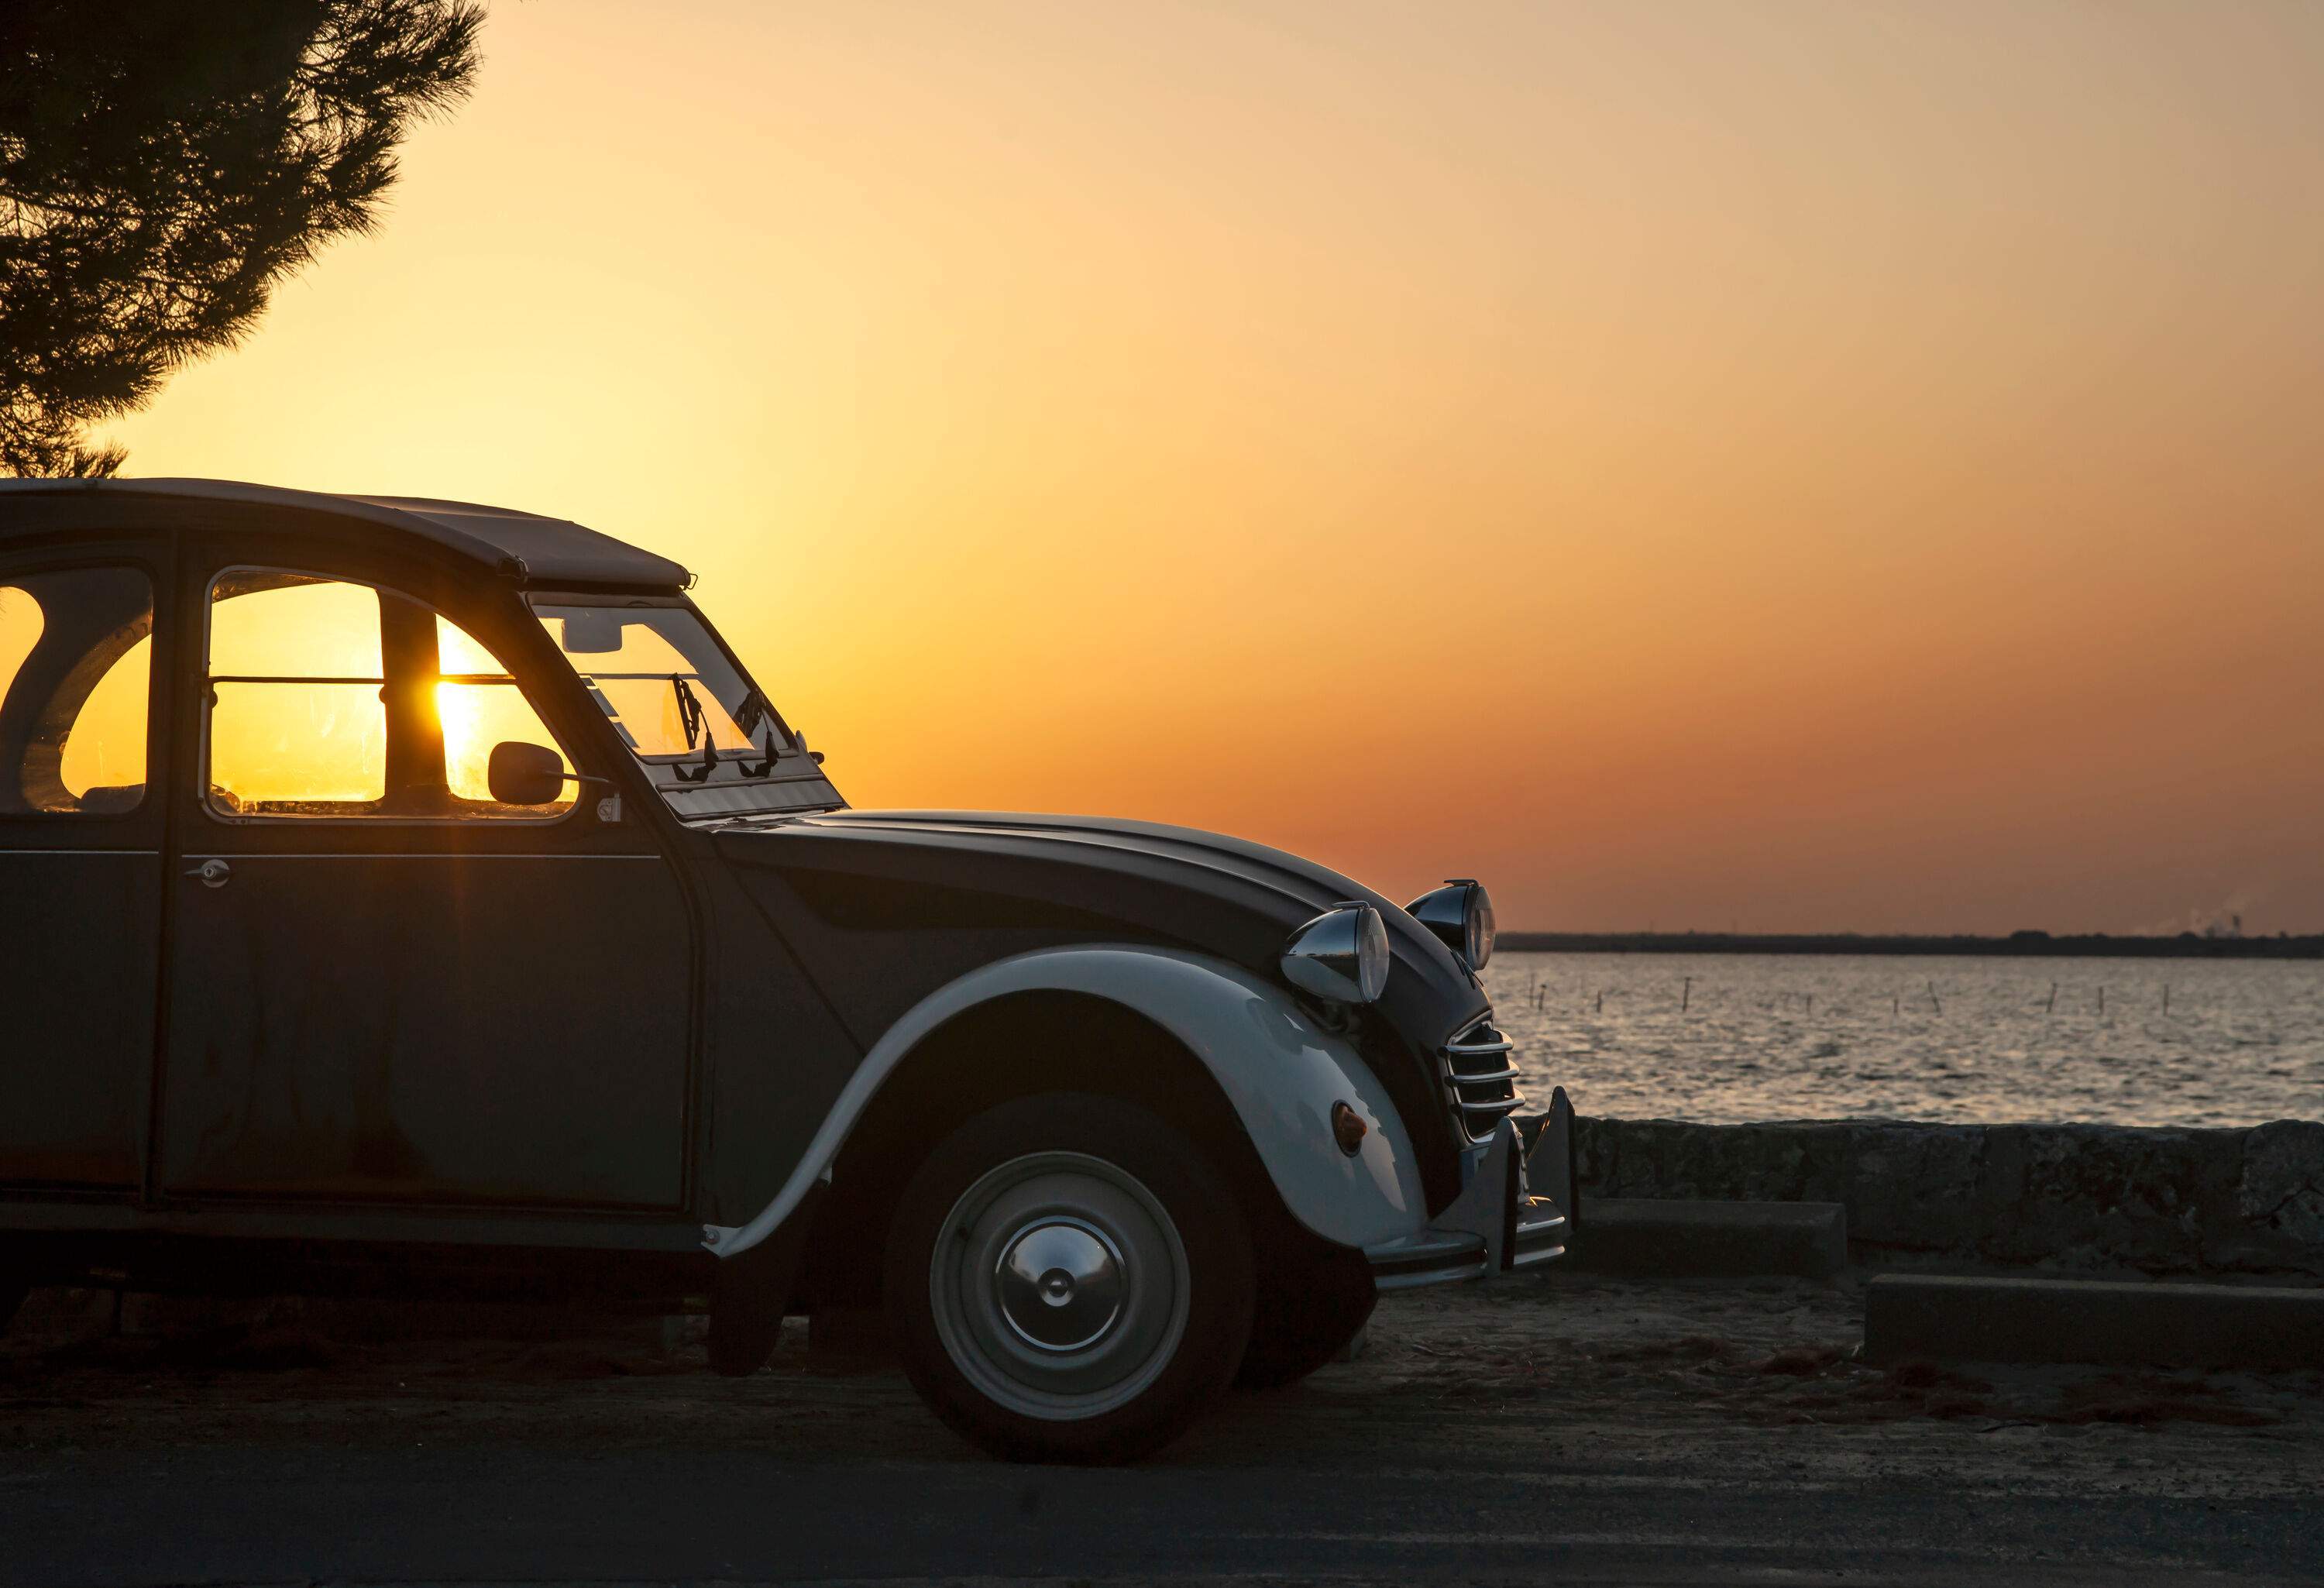 Silhouette of a vintage car parked on a beach against the backdrop of a beautiful sunset and orange skies.